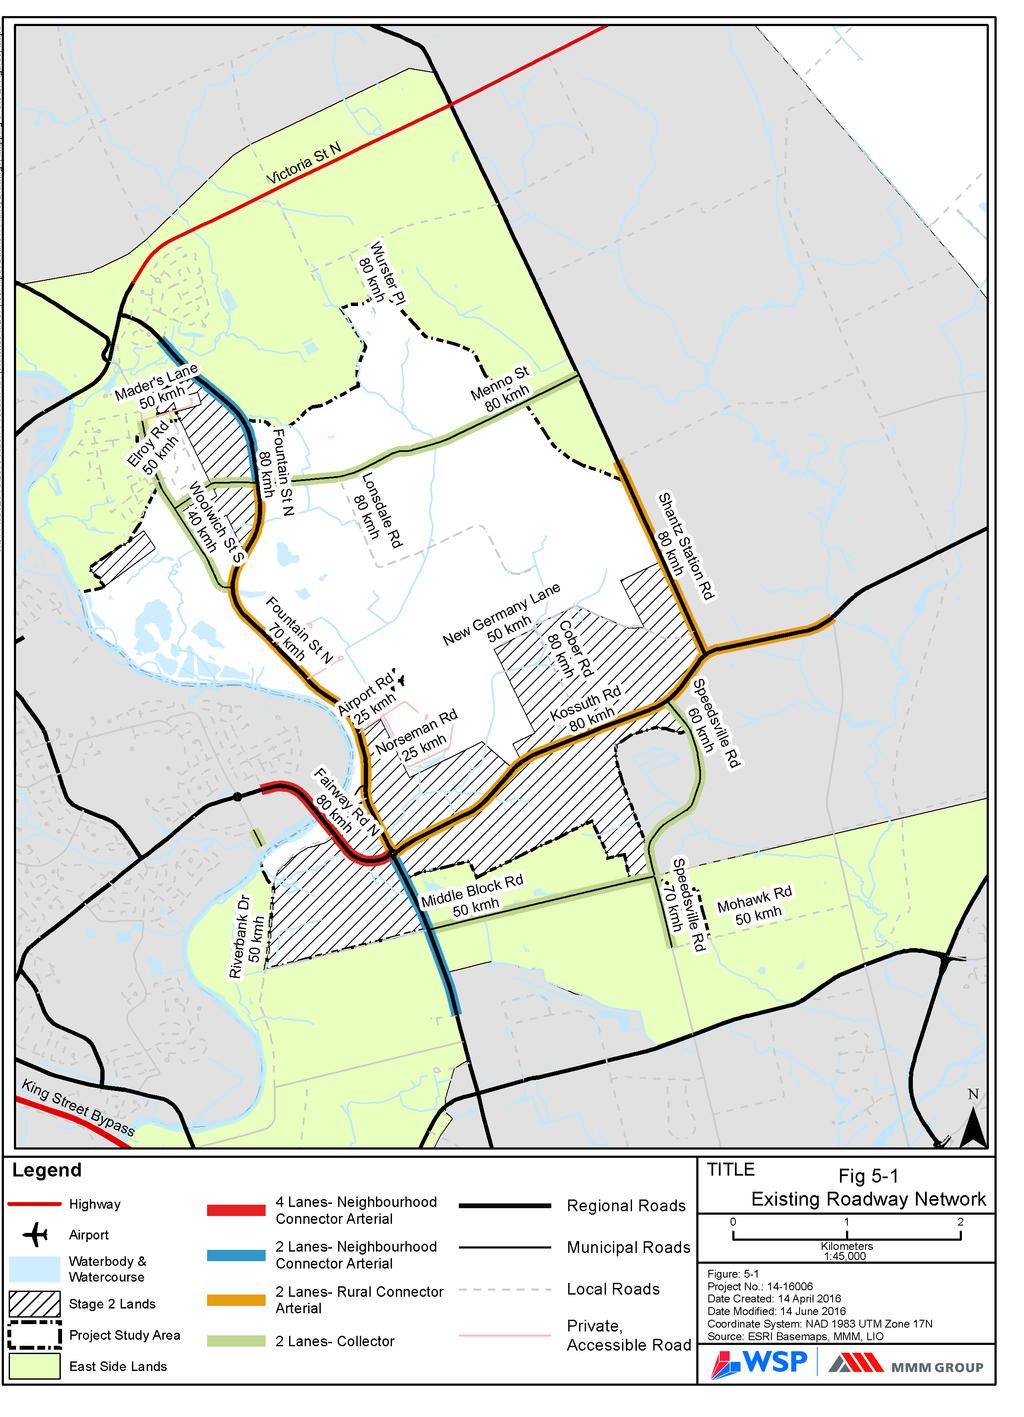 Existing Road Network and Planned Improvements 15 Figure 5-1 shows the existing roadway